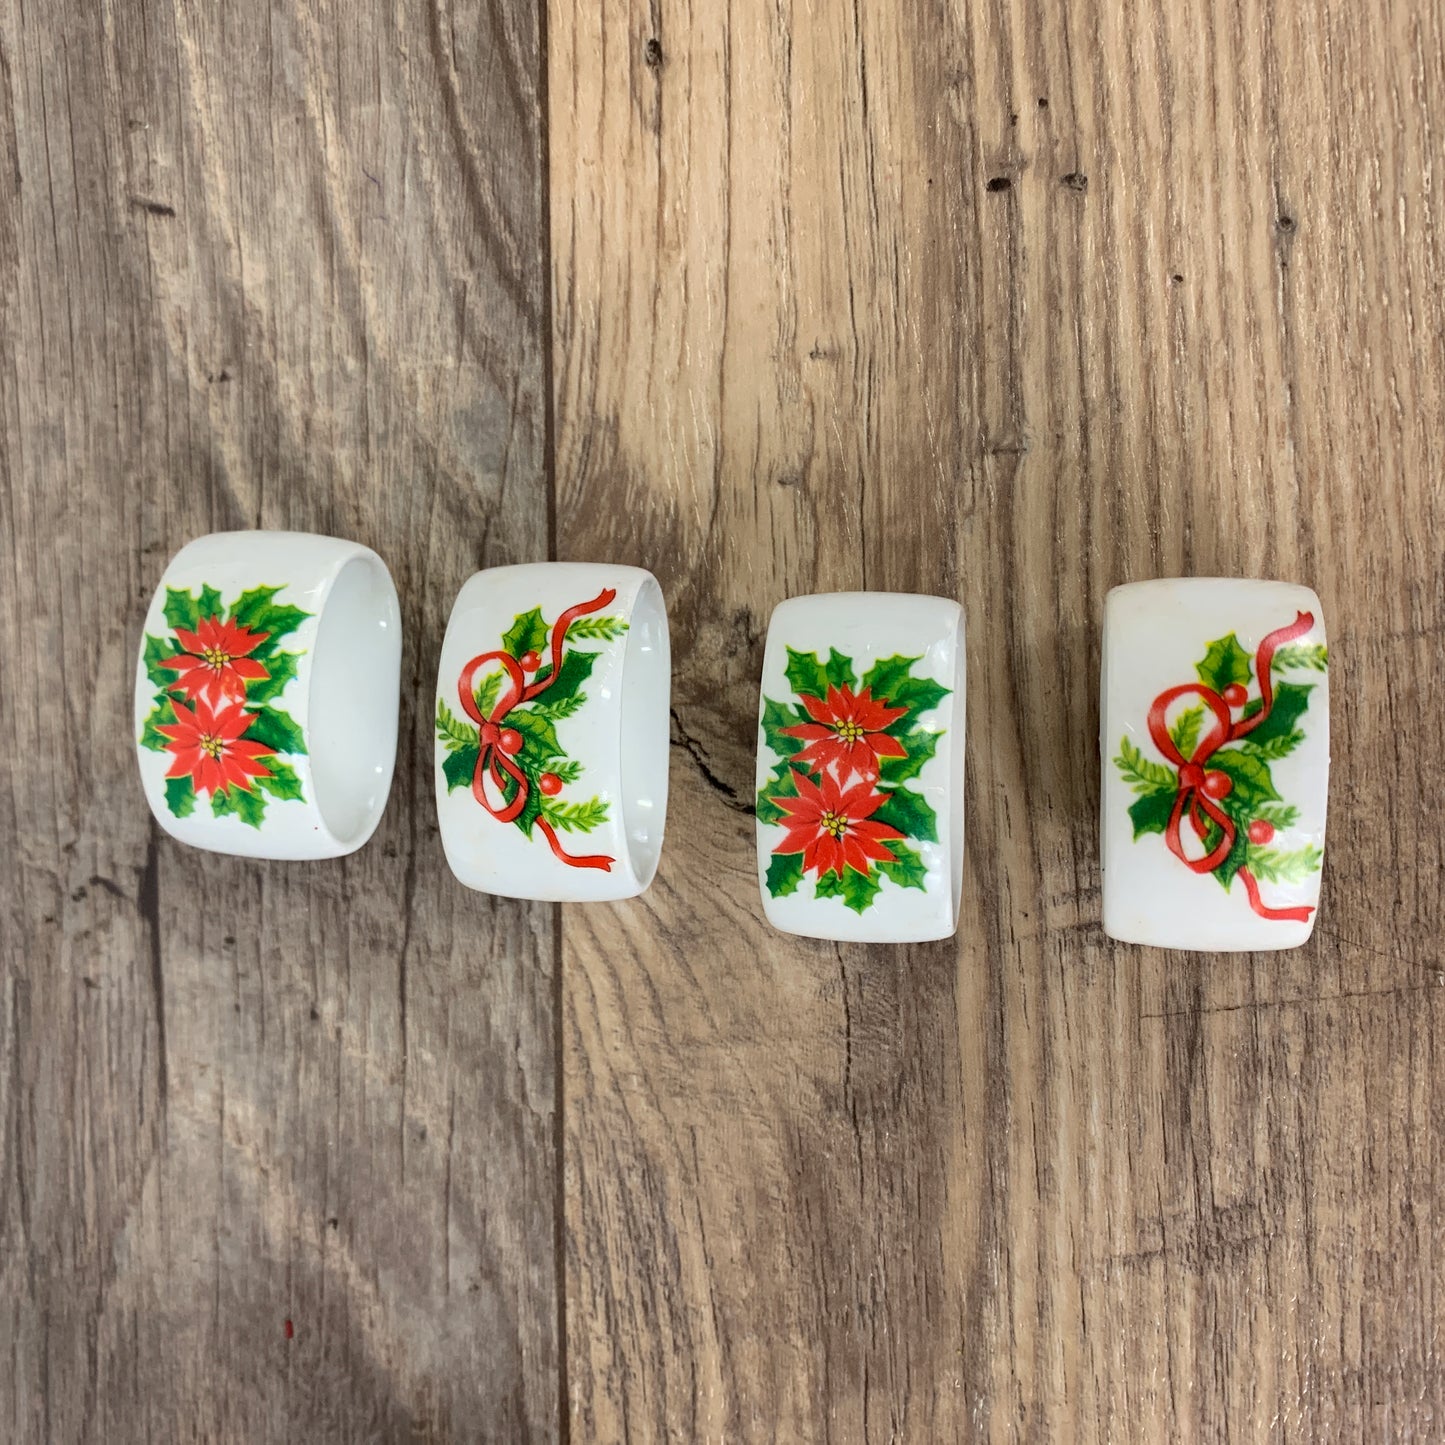 Set of 4 Christmas Napkin Rings, Ceramic Napkin Rings with Red and Green Holiday Napkin Holders